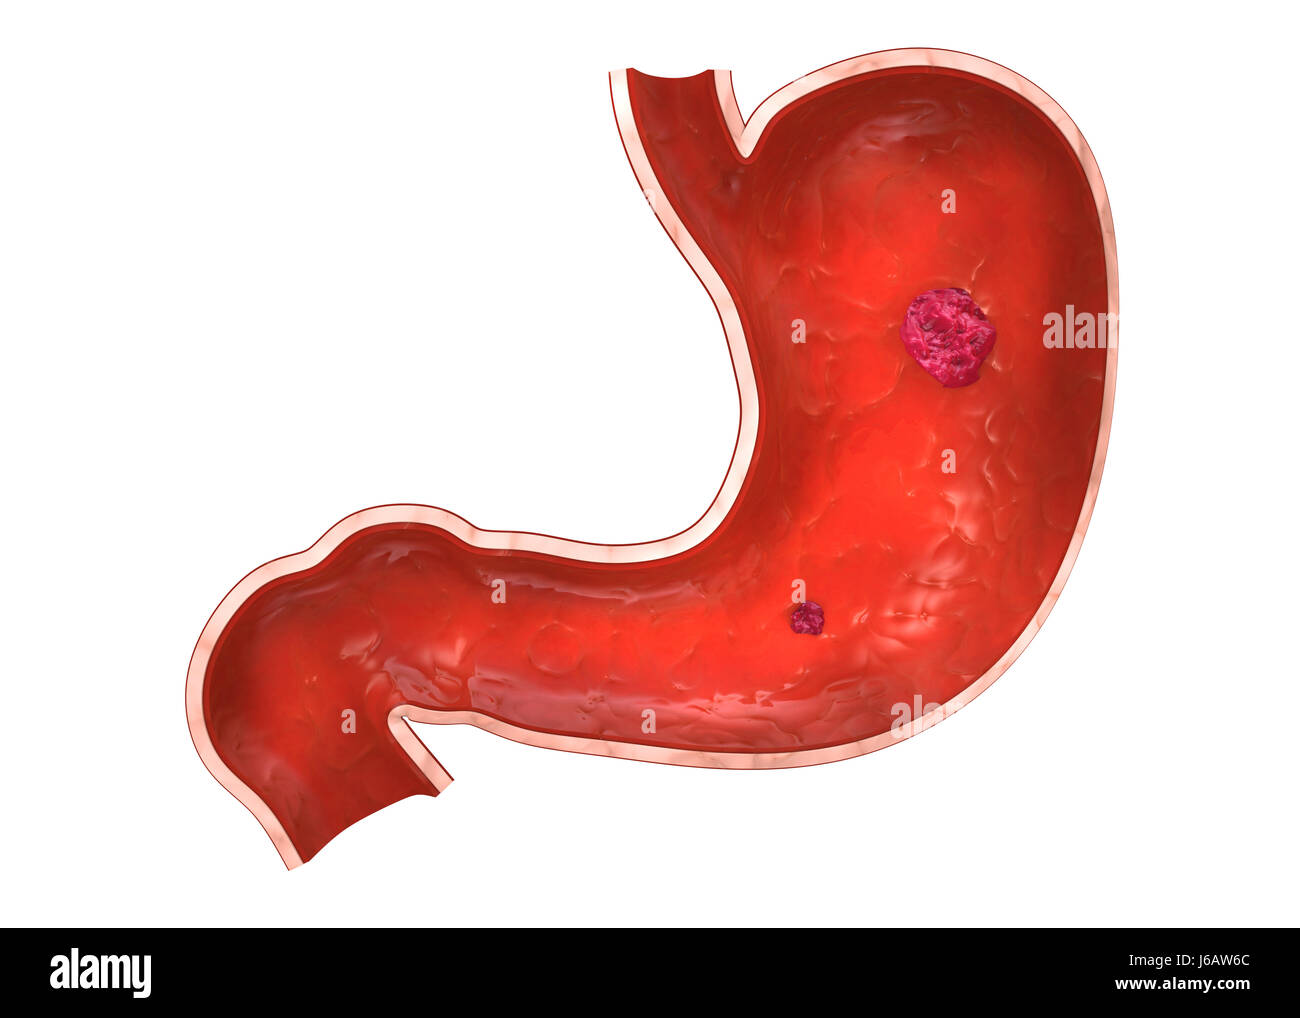 health medicinally medical human human being belly tummy ache digestion anatomy Stock Photo